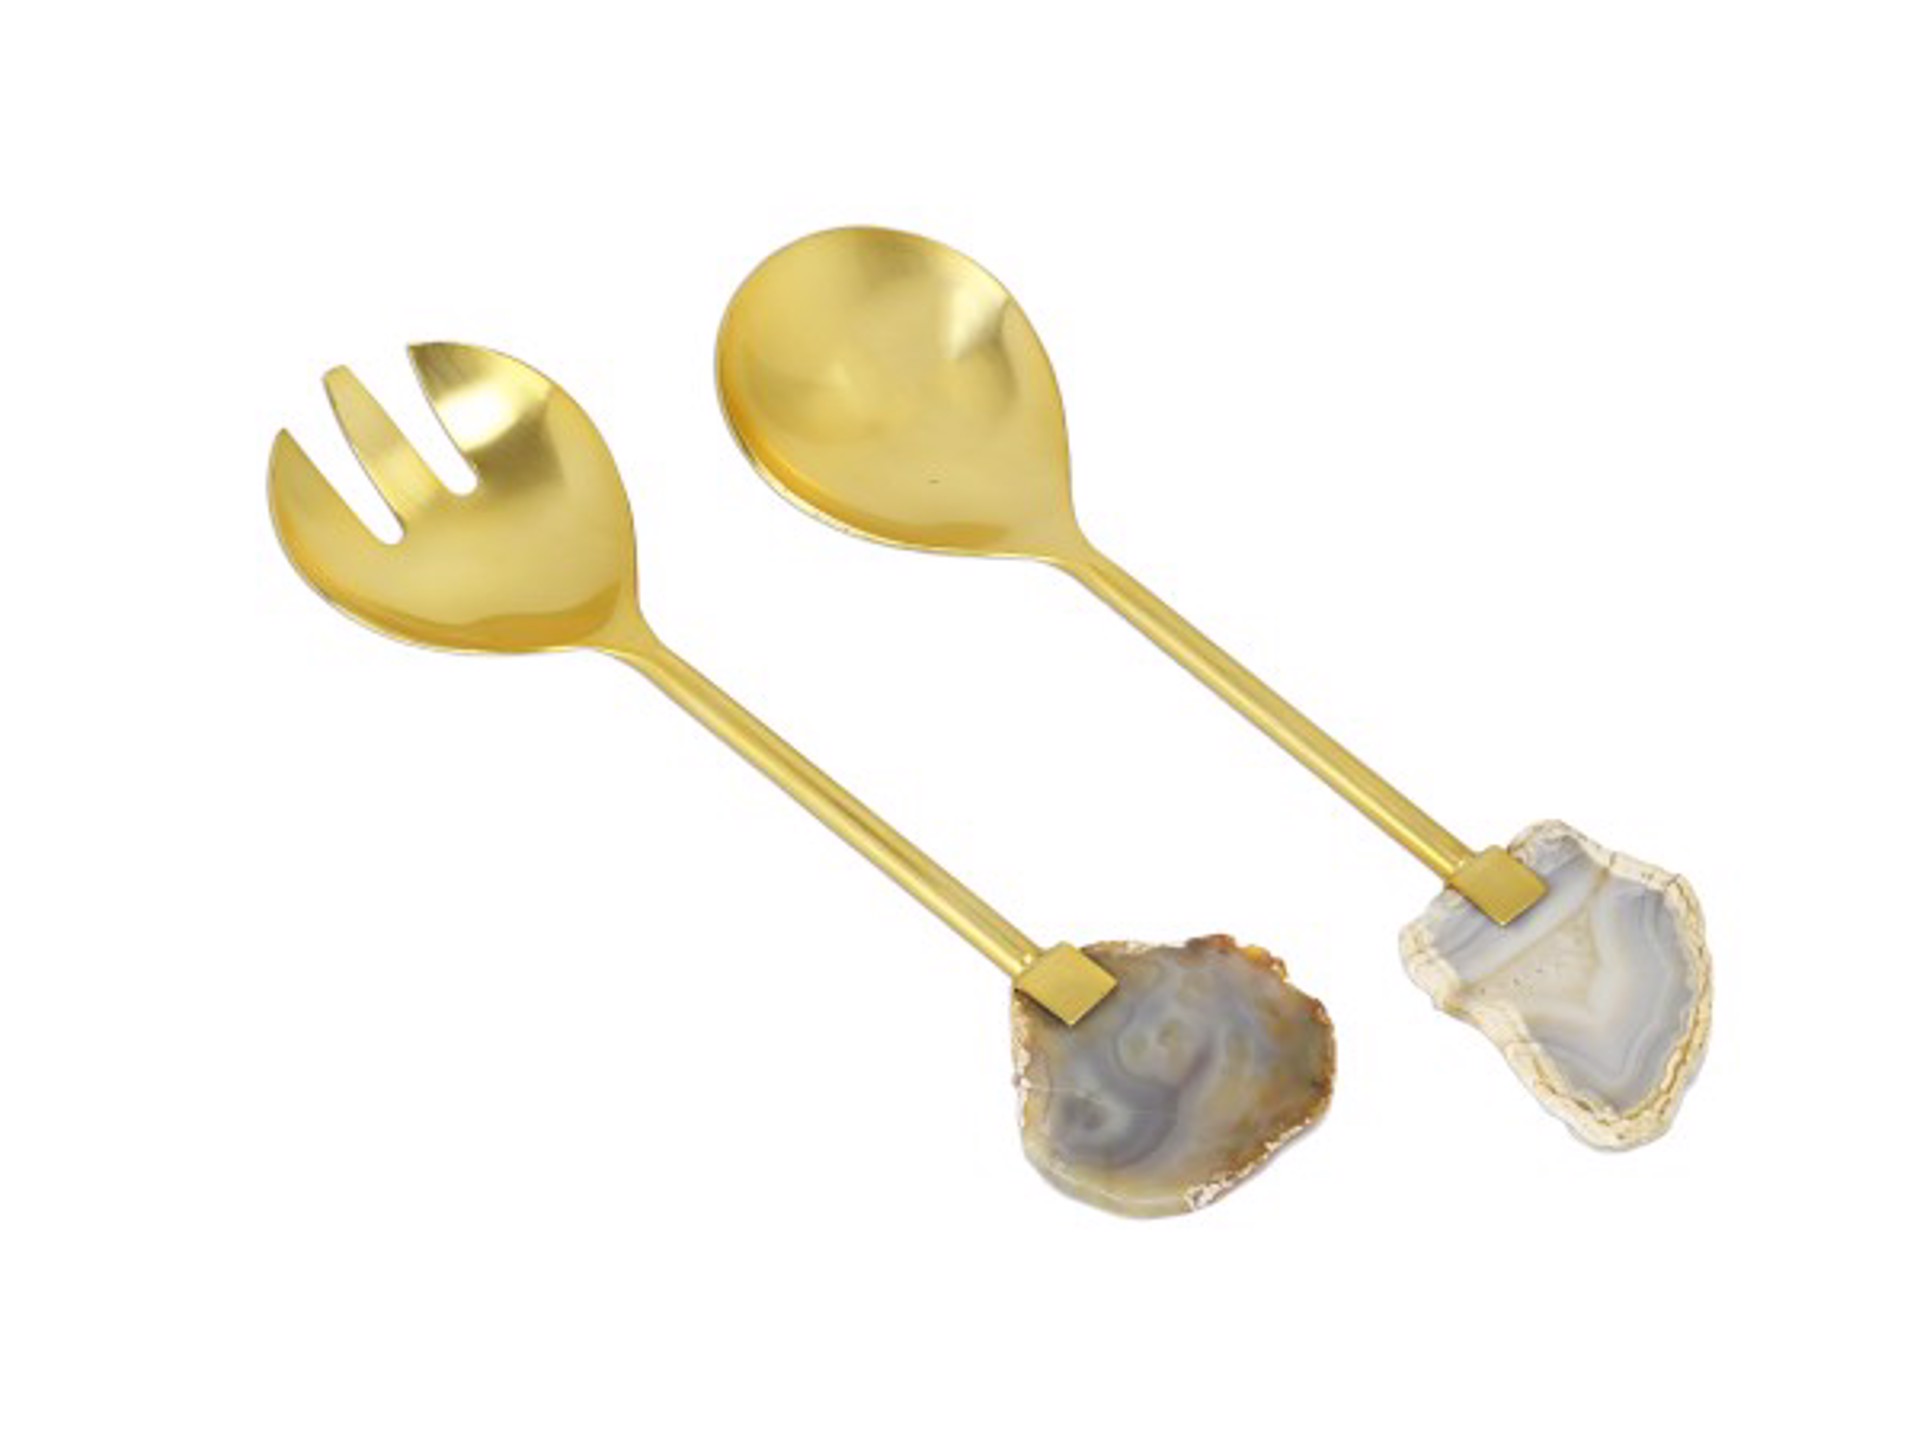 Gold Salad Servers with Agate Handle by Argent